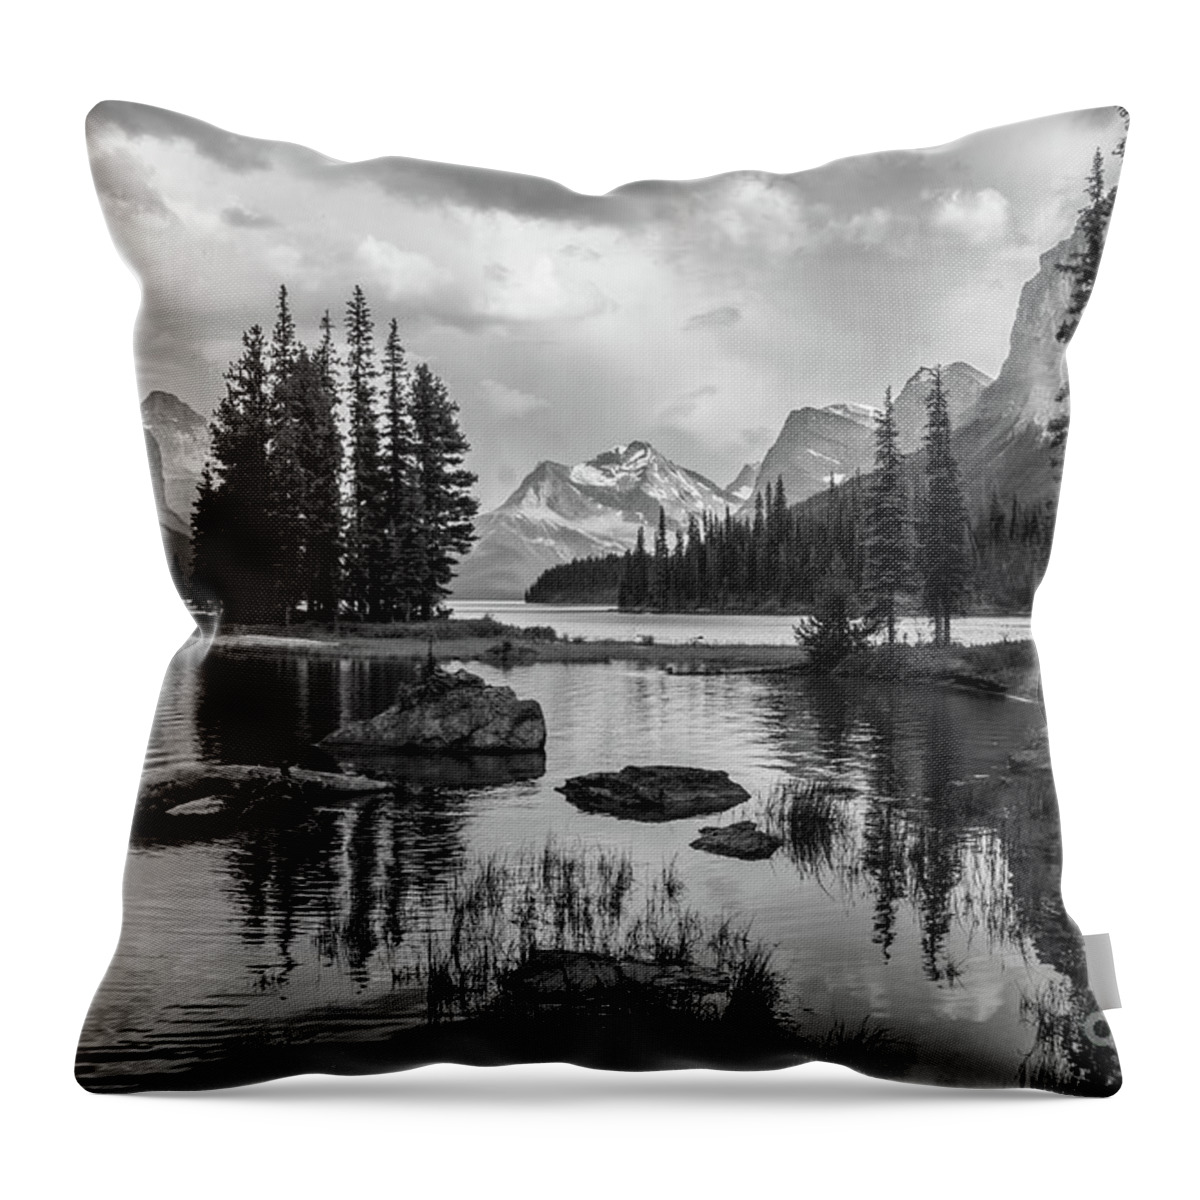 Black And White Throw Pillow featuring the photograph Spirit Island Canada by Chris Scroggins